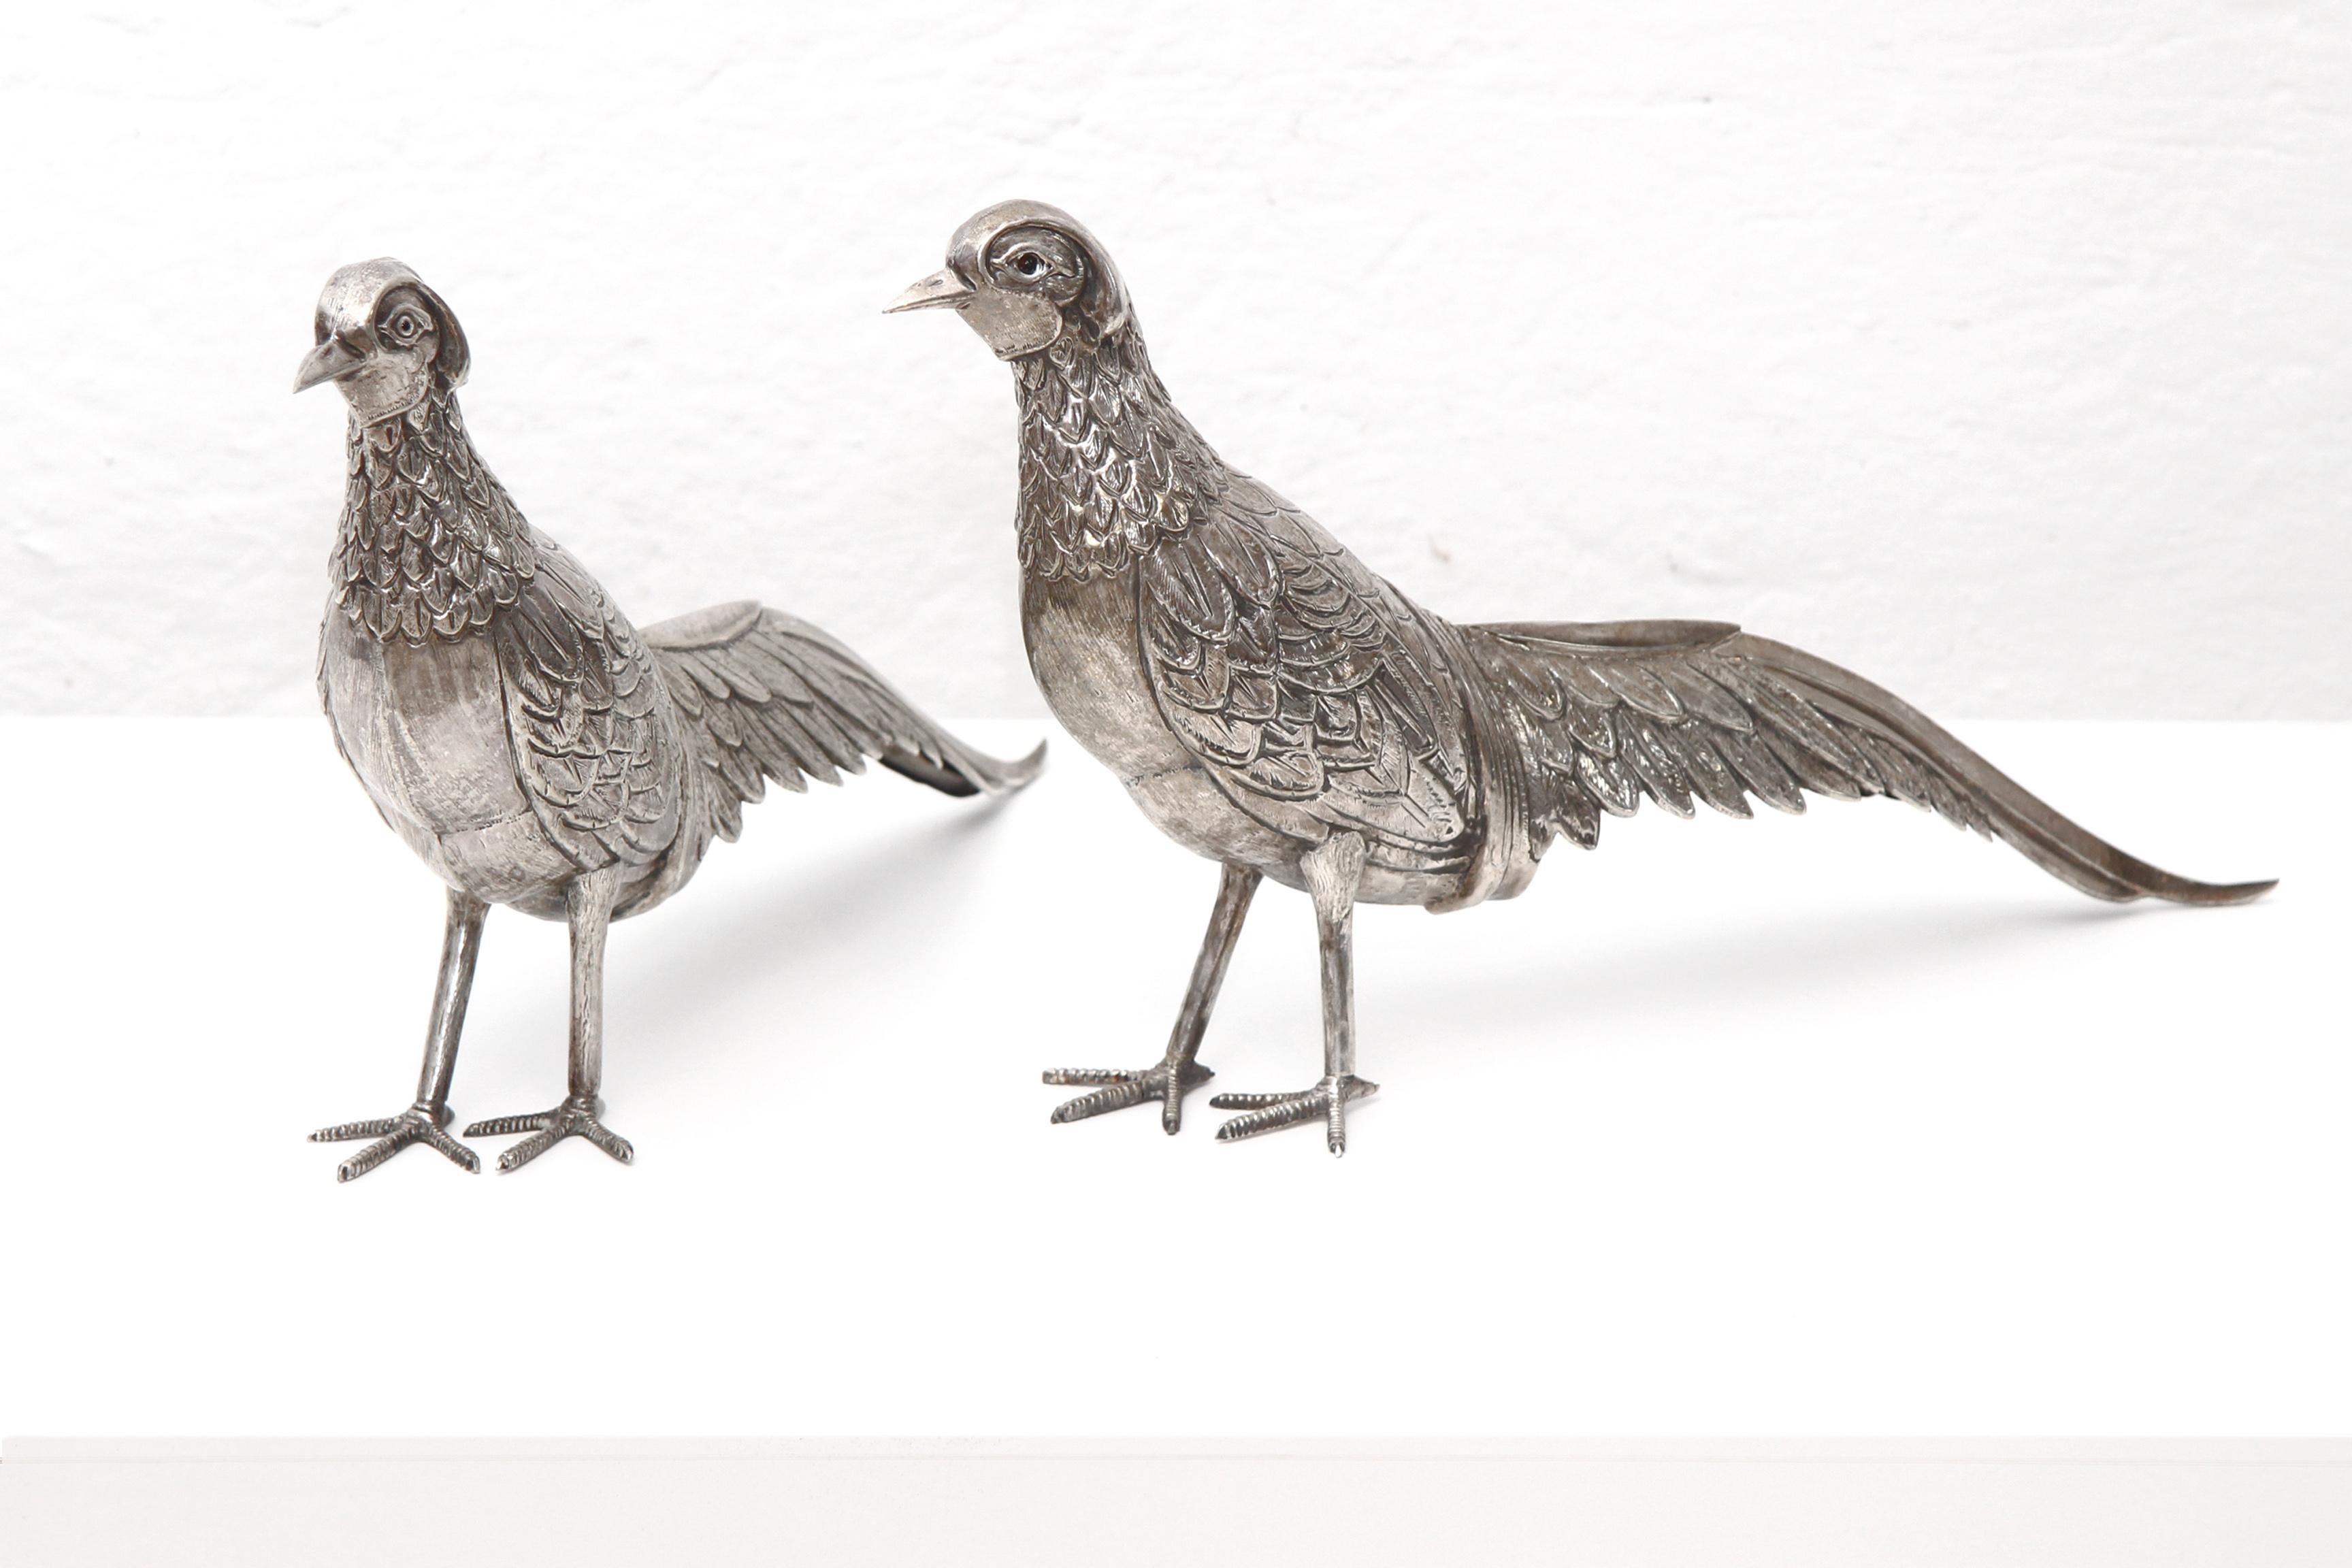 Austrian Fine Art Nouveau Silver Pheasants from Austria, Vienna Driven by Hand, Chased